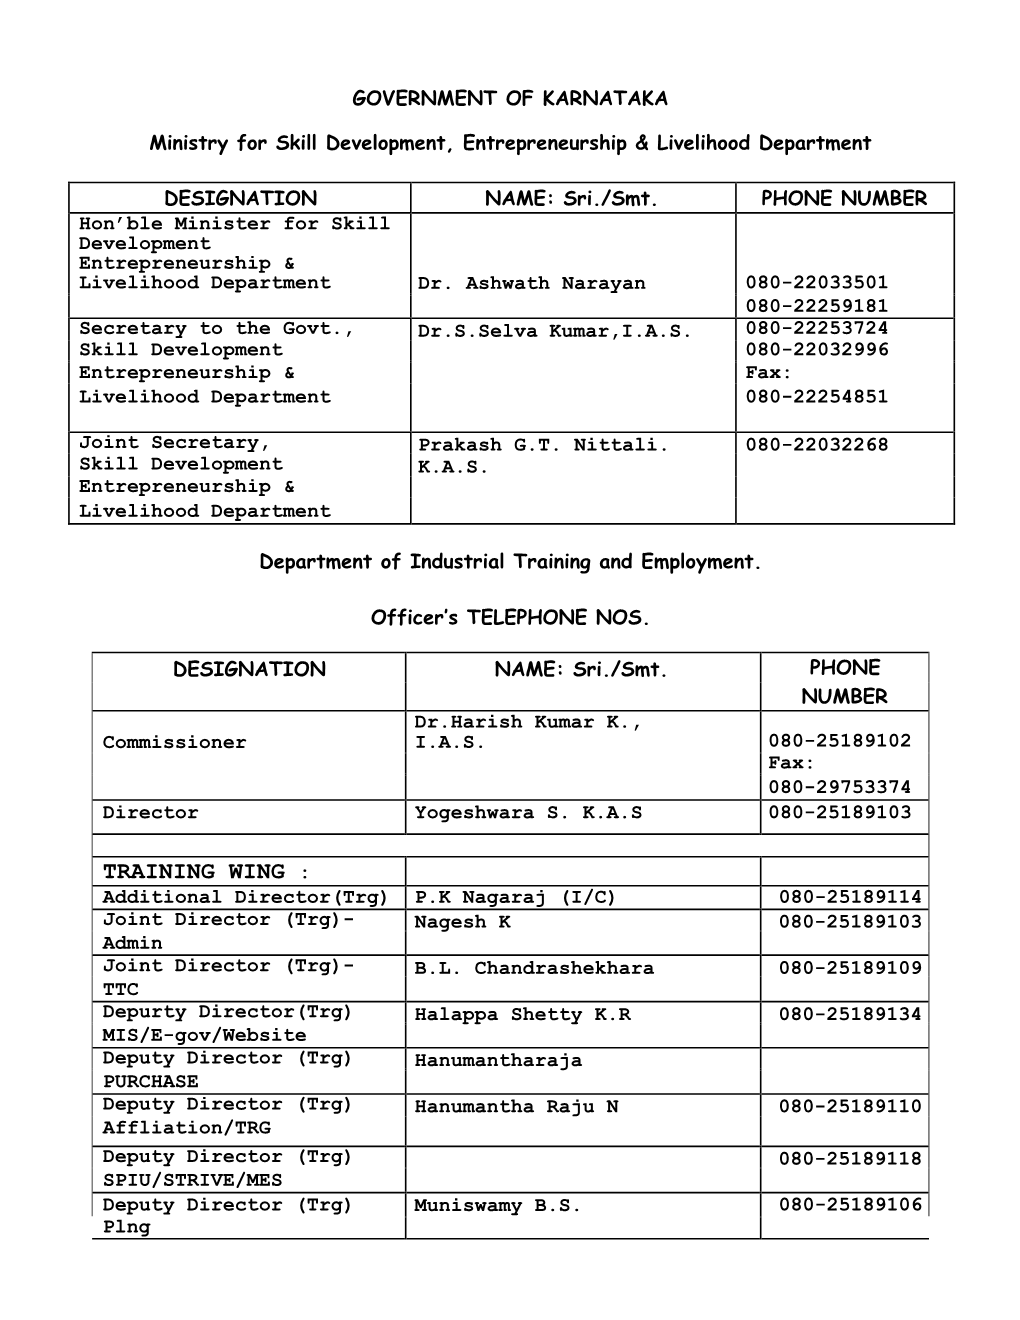 State Directorate Contact List